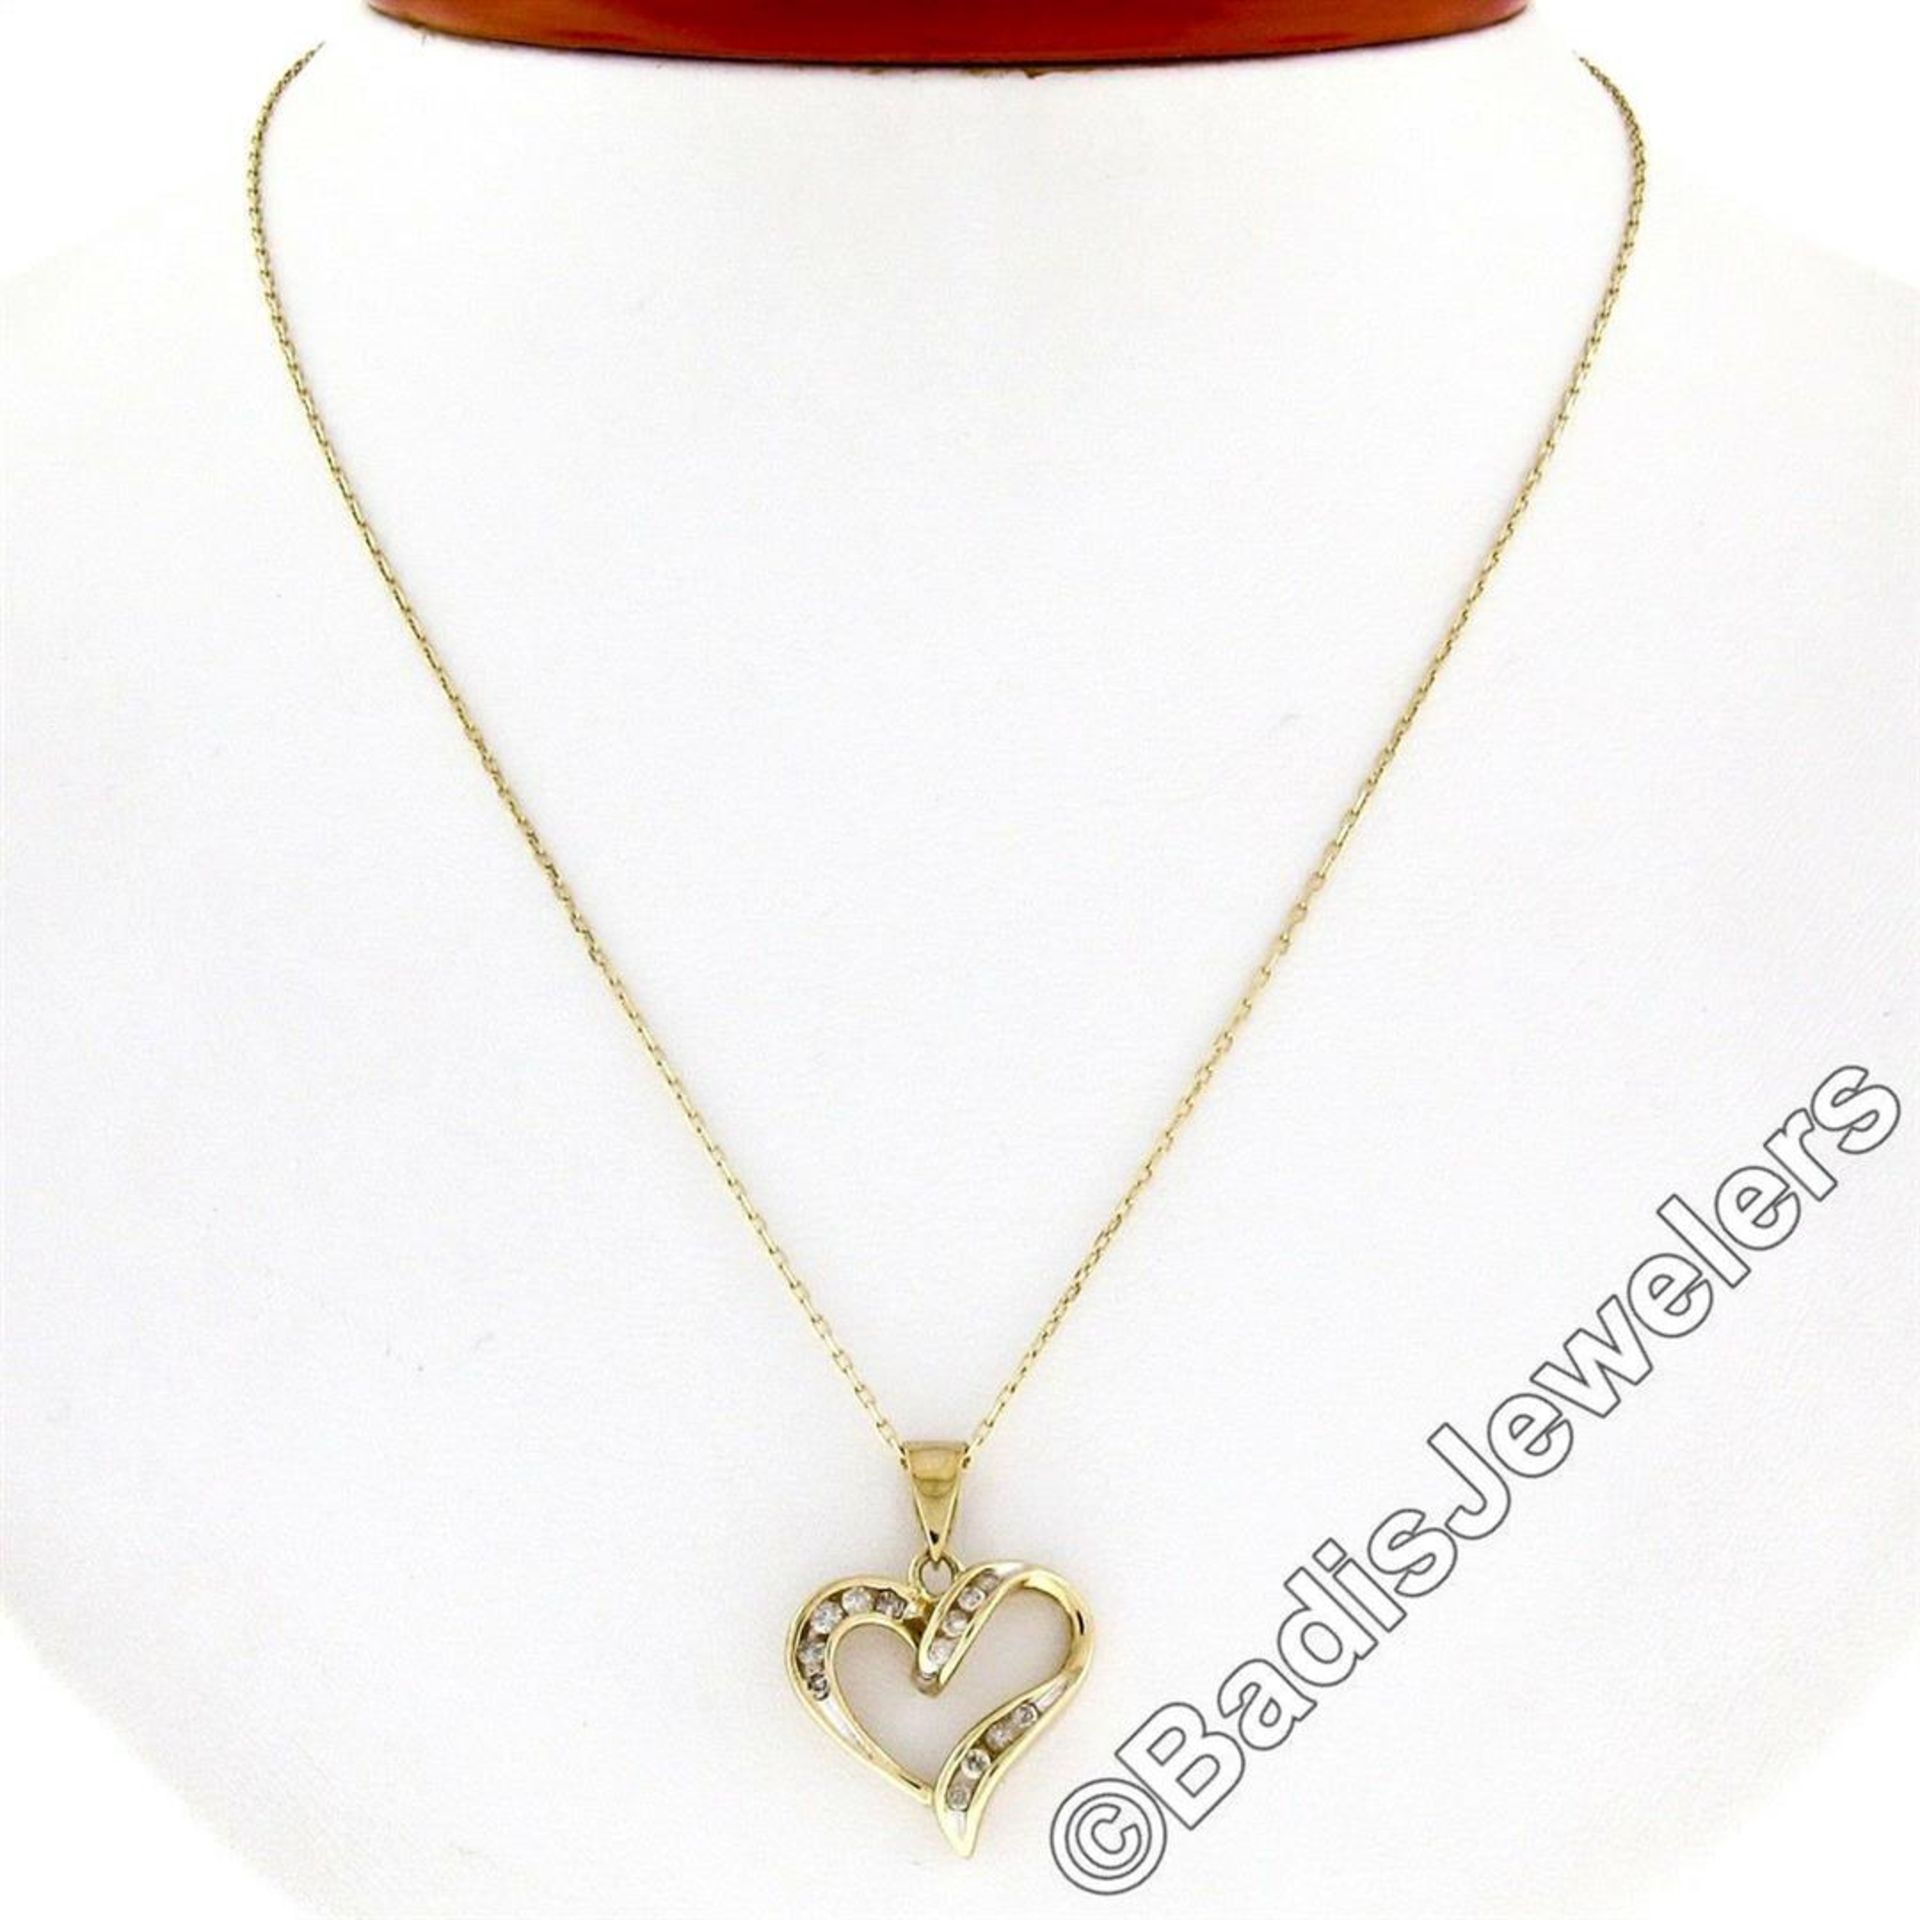 10kt Yellow Gold 0.26 ctw Channel Set Round Diamond Open Heart Pendant Necklace - Image 3 of 7